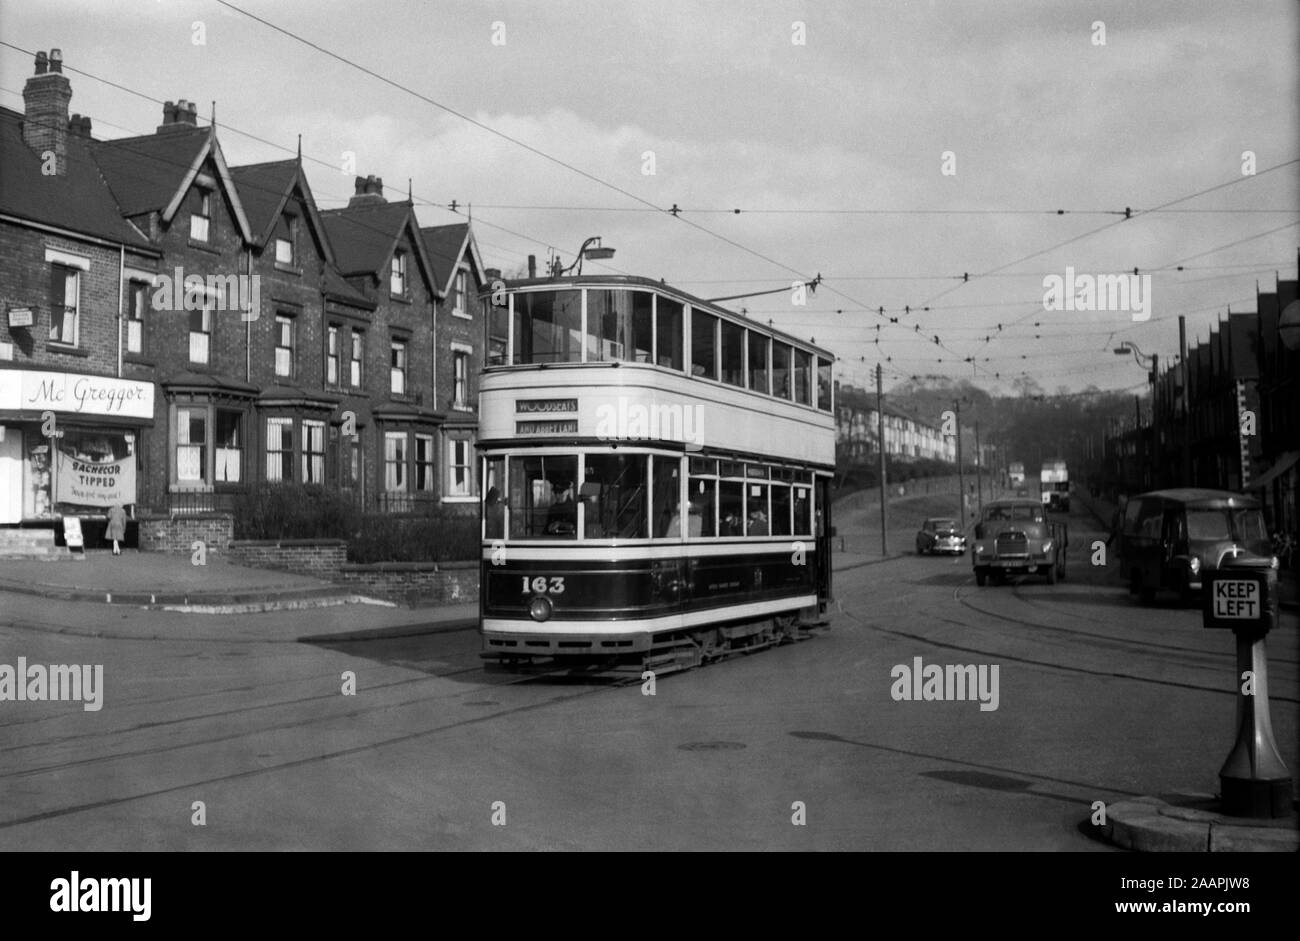 Sheffield Corporation Standard Tram no 163 on Firth Park Road on route to Woodseats and Abbey Lane. Image taken during the 1950s. Stock Photo